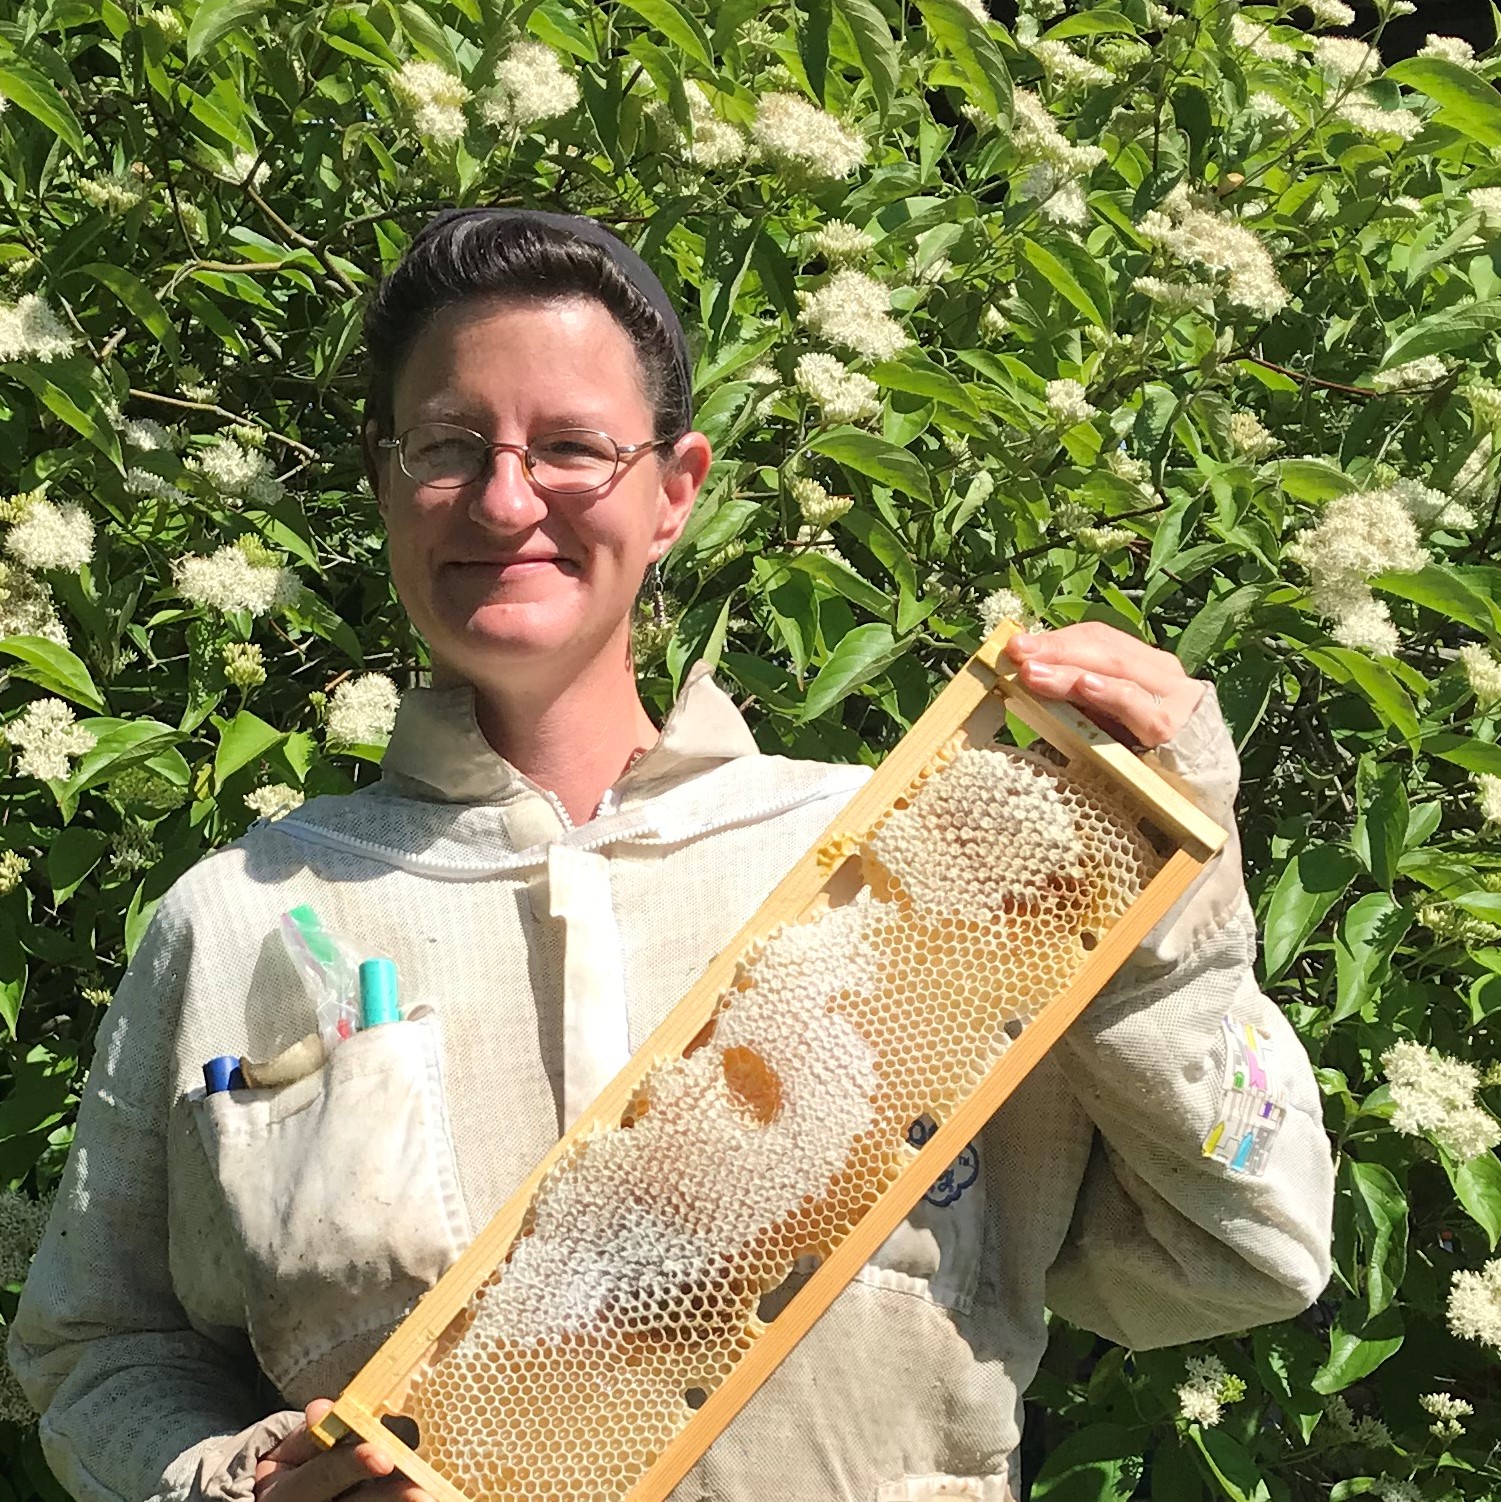 Trish holding a frame of honeycomb